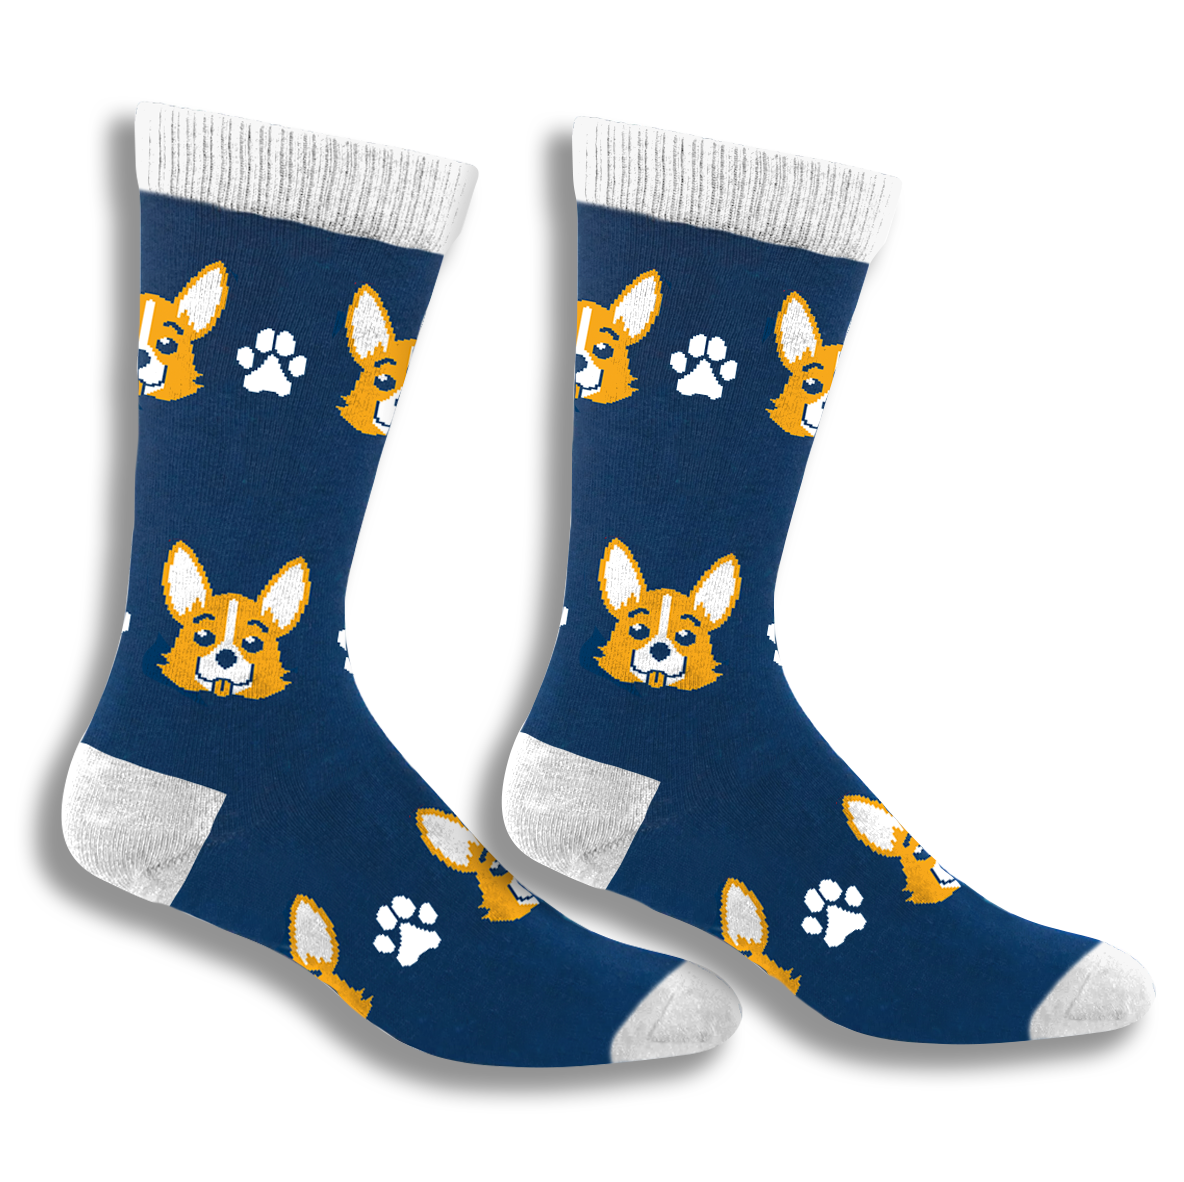 A pair of medium bue crew socks with white ankles, toes, and cuffs. The socks are printed with a yellow cartoon corgi face and white paw prints all over.